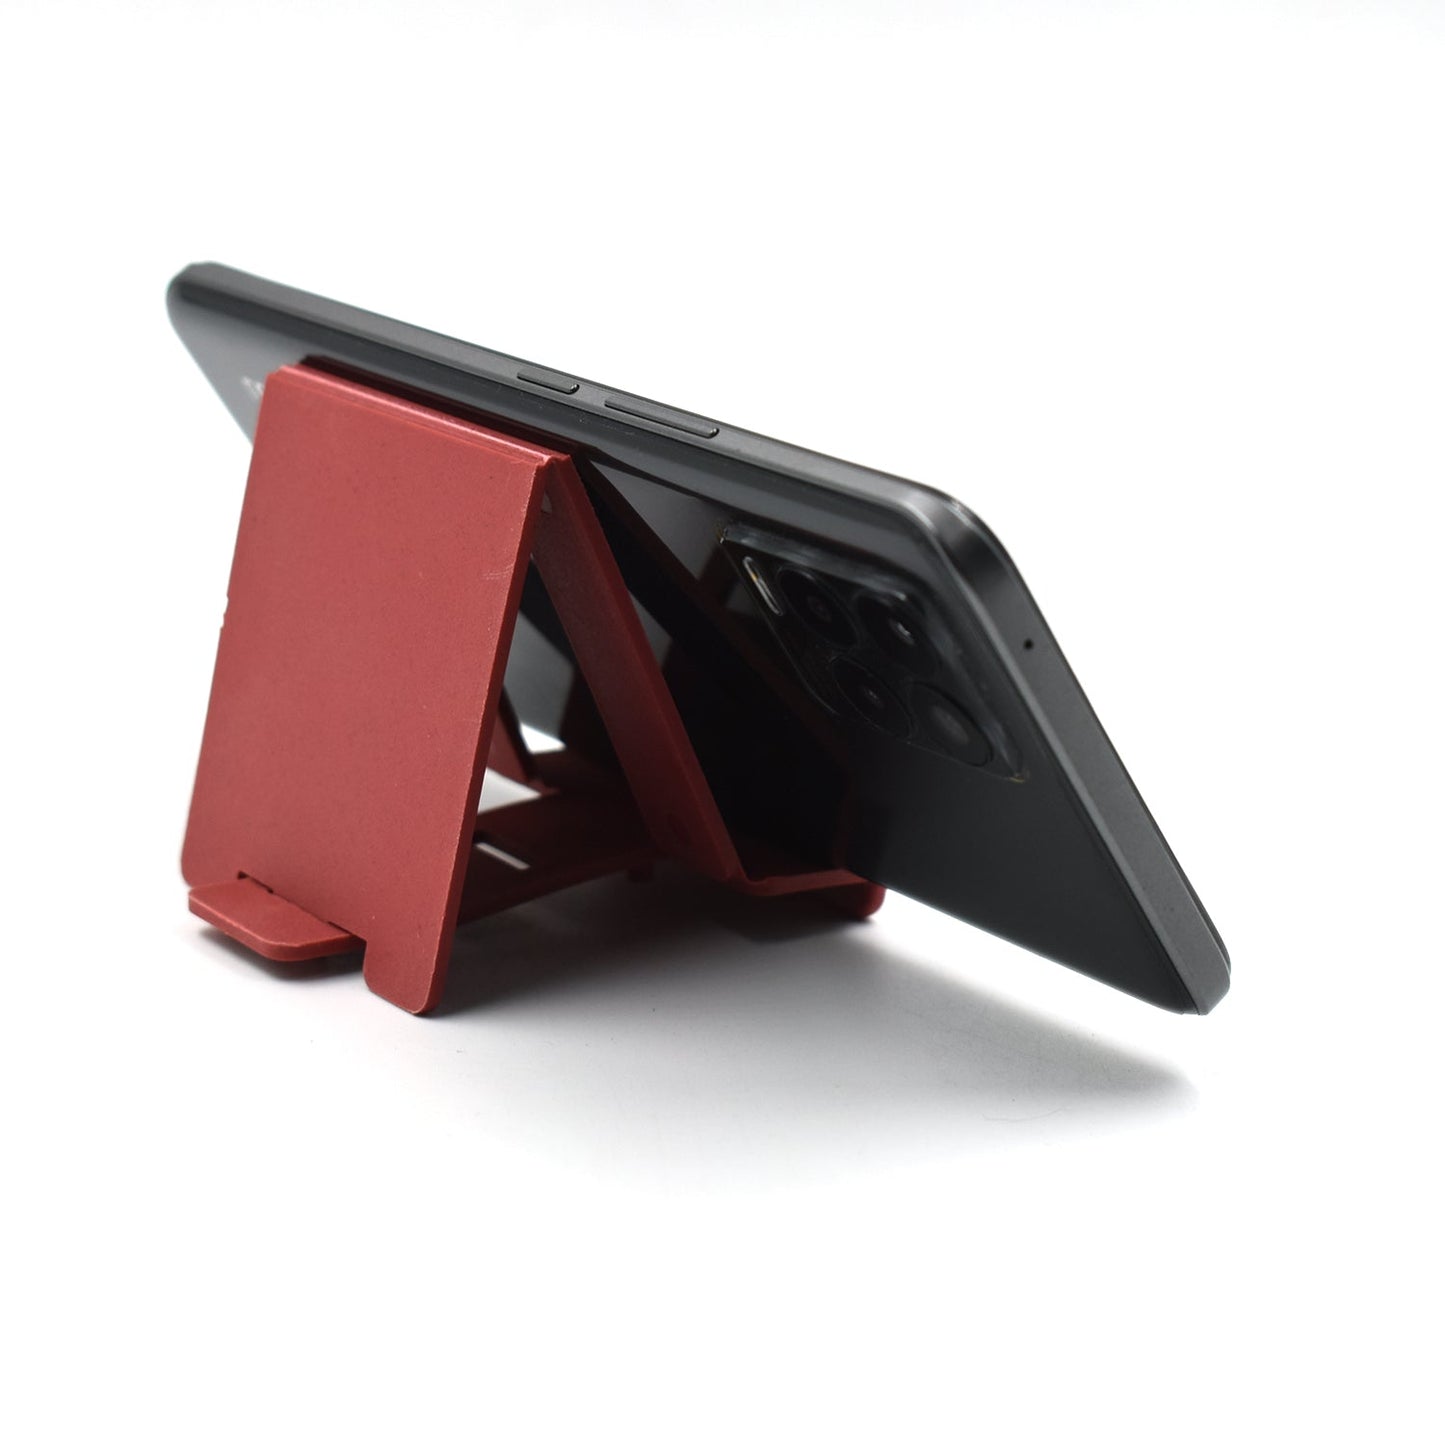 4793 10 Pc Adjustable Mobile Stand used in all kinds of places including household and offices as a mobile supporting stand. DeoDap